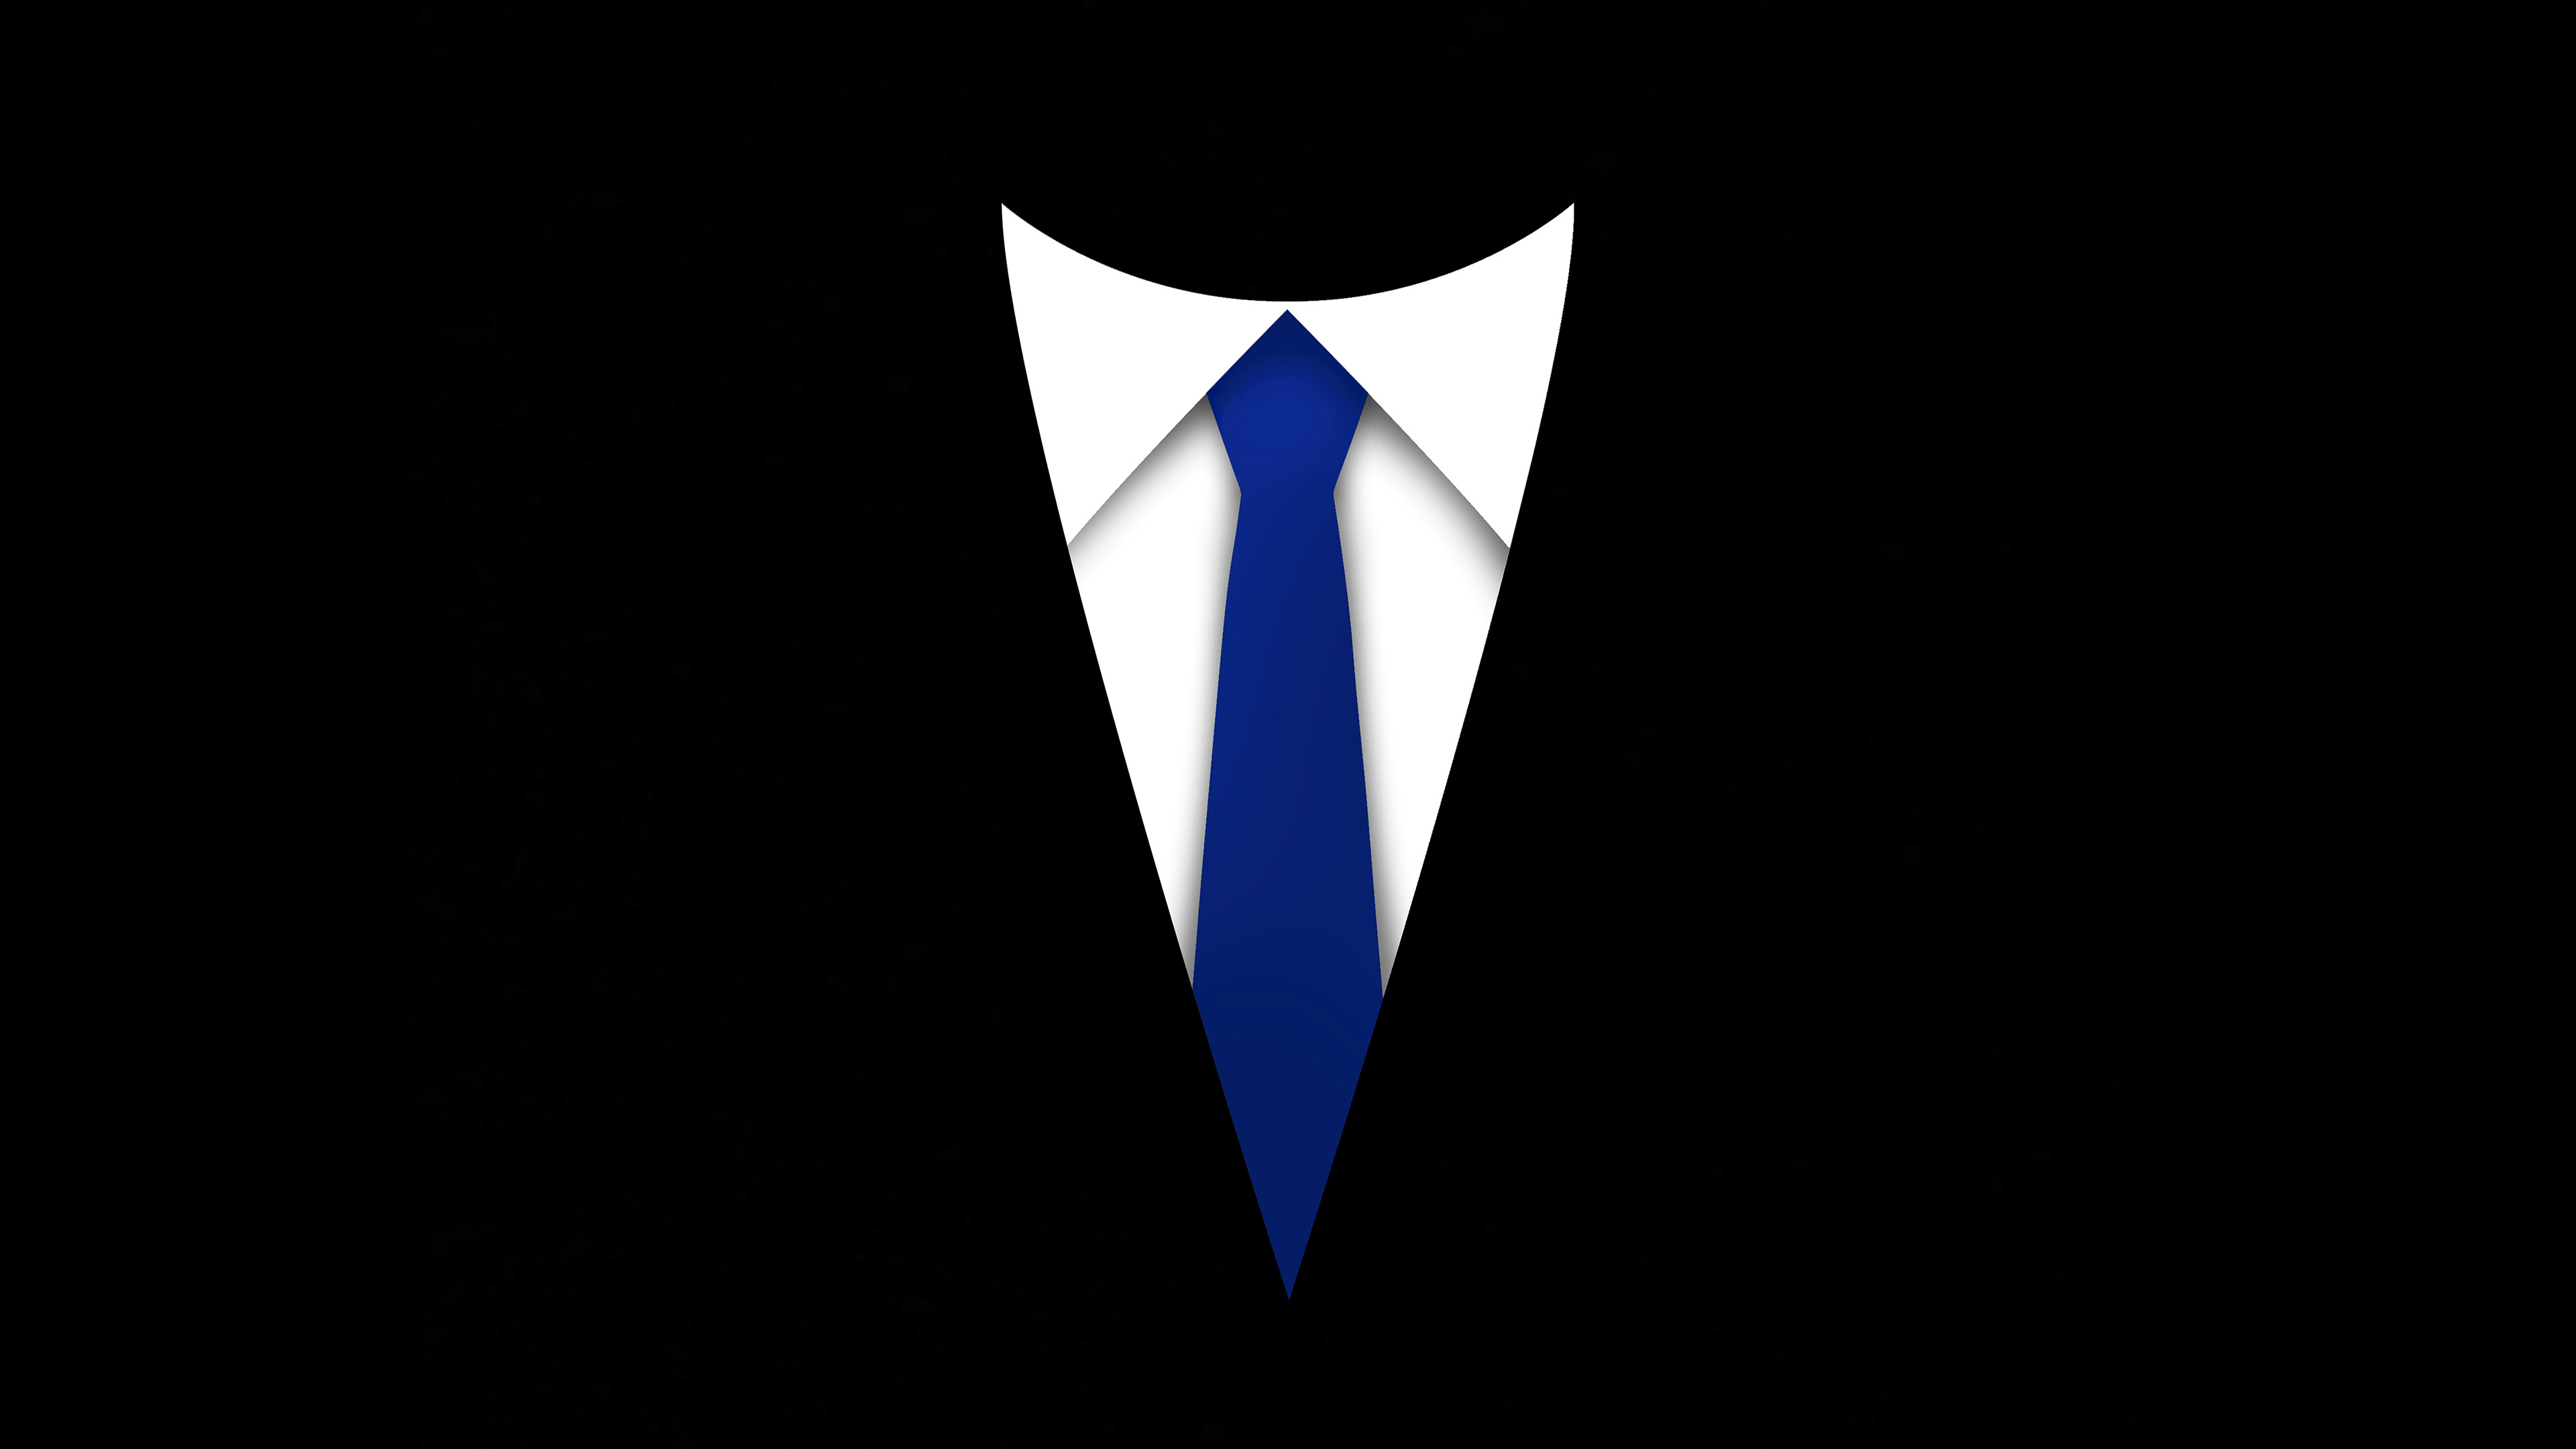 Tie and suit, Artist 4K wallpapers, Photos and pictures, HD backgrounds, 3840x2160 4K Desktop